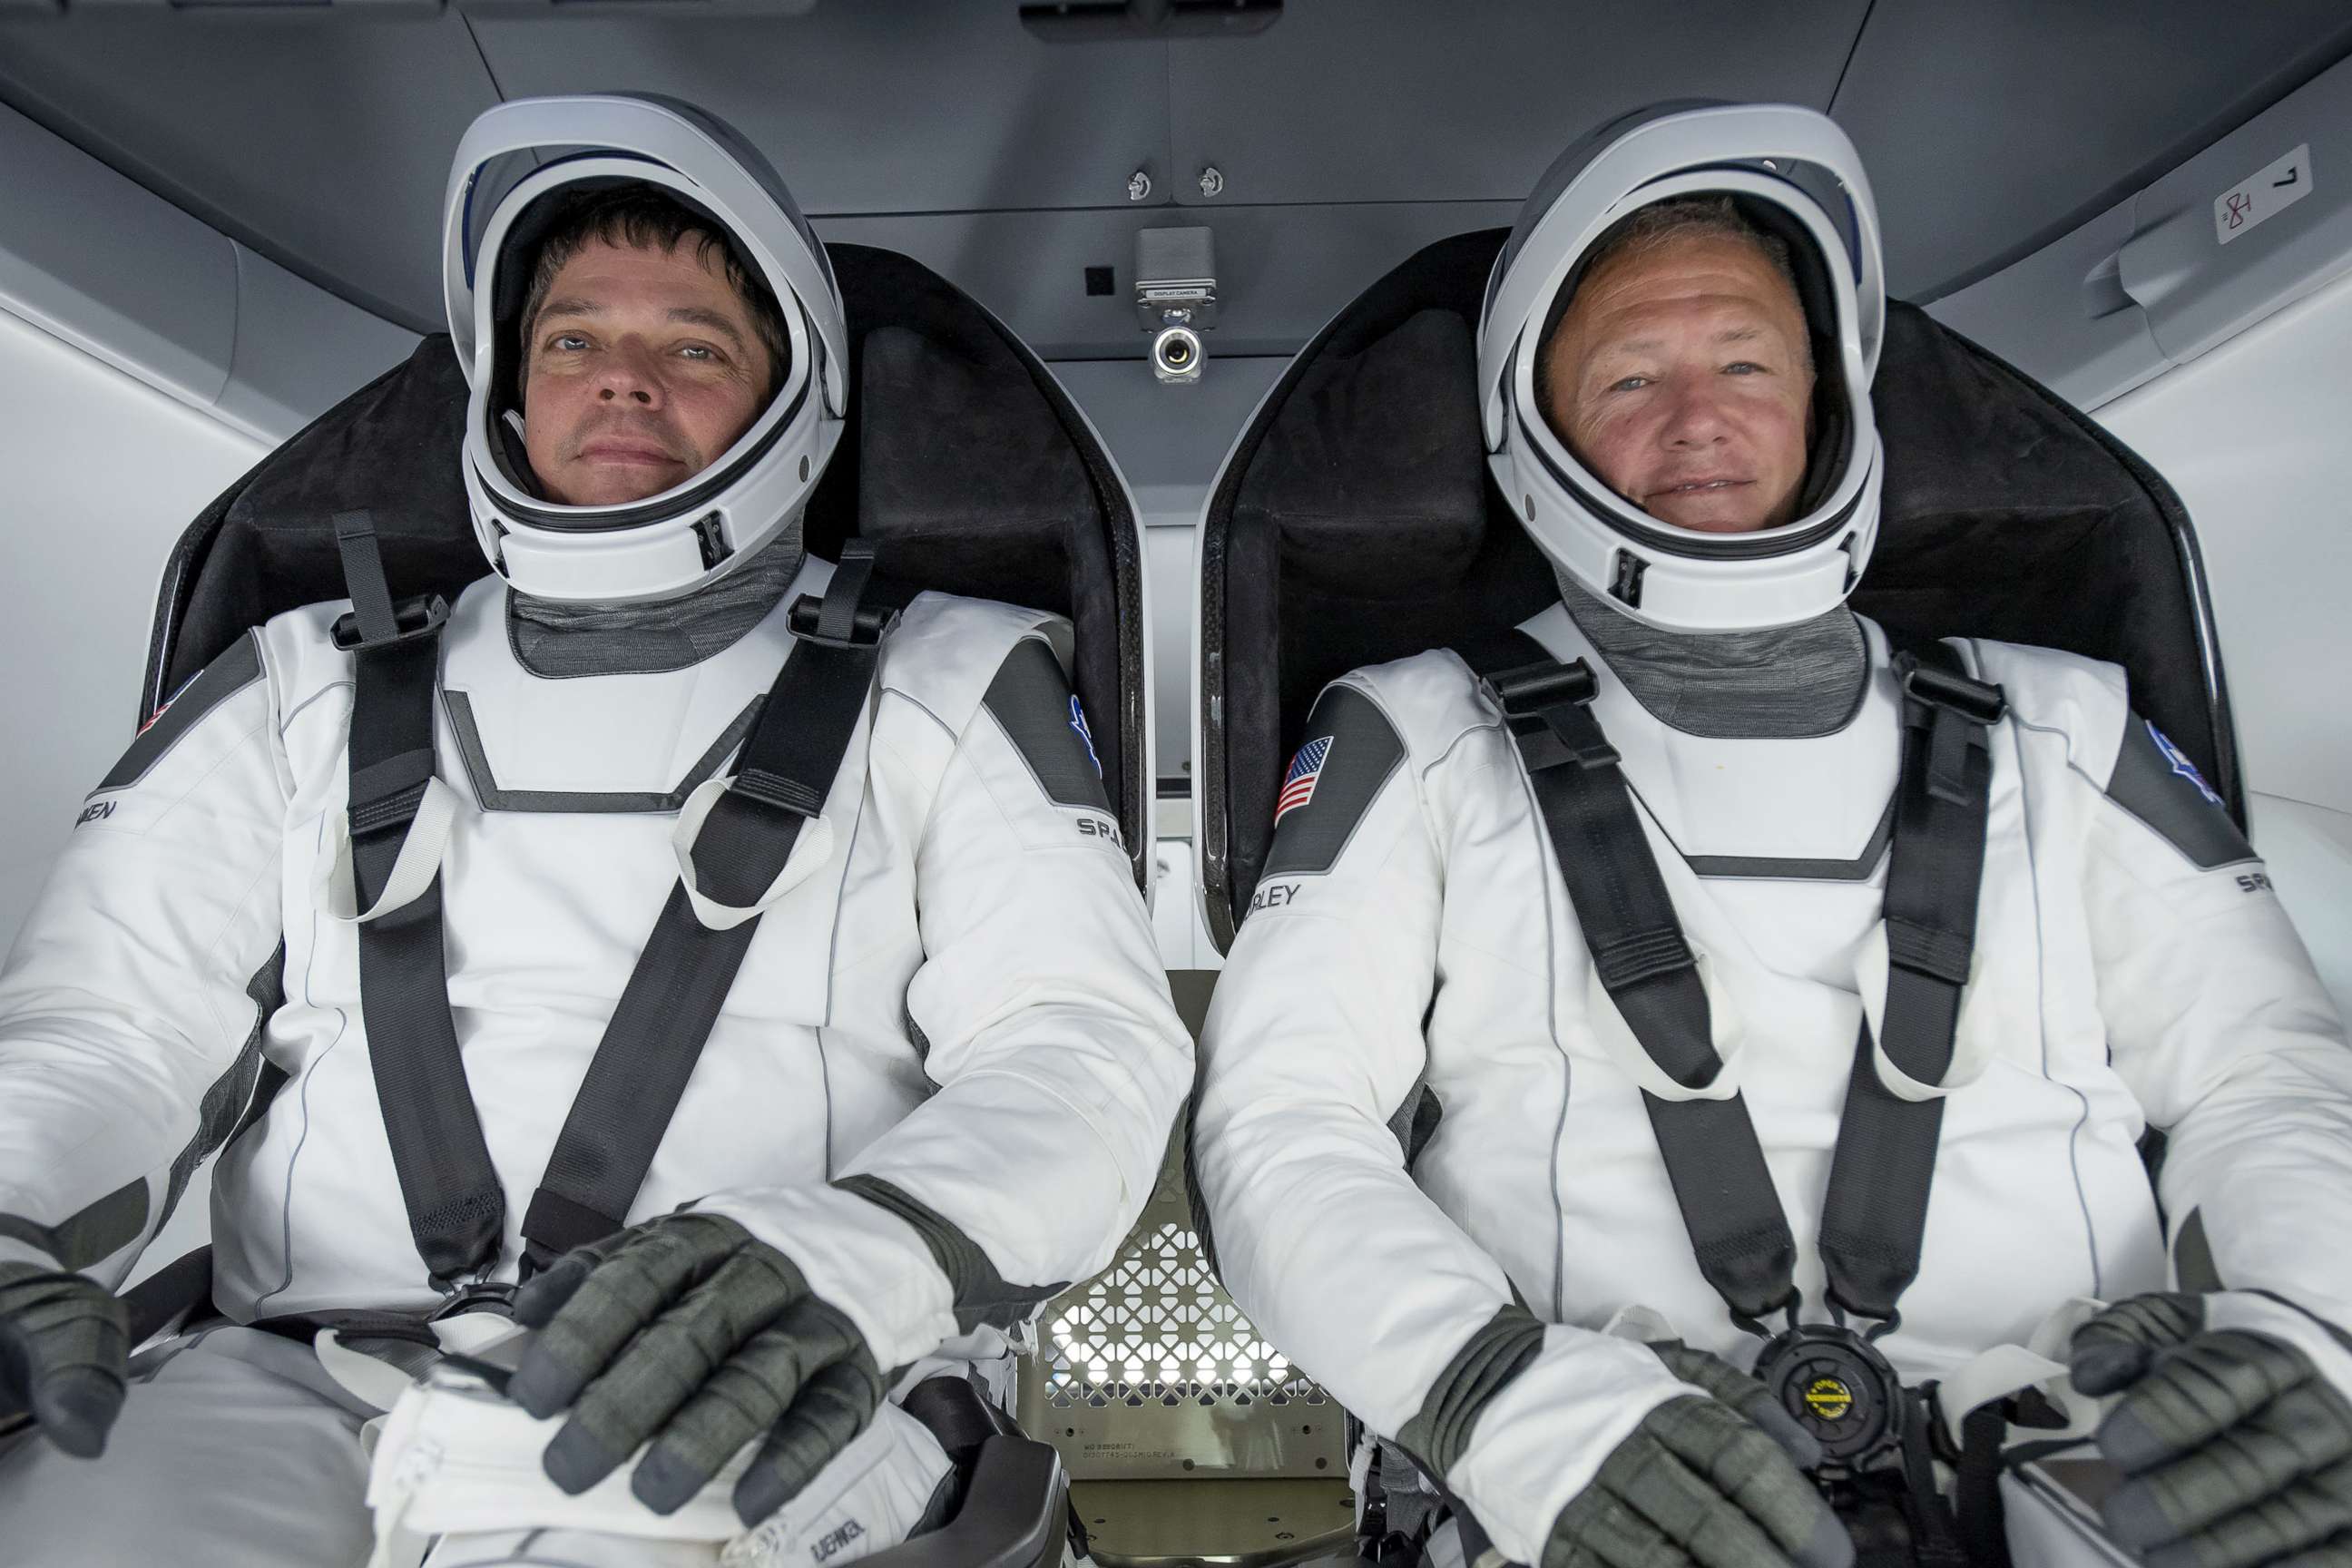 PHOTO: NASA astronauts Bob Behnken, left, and Doug Hurley participate in a fully integrated test of SpaceX Crew Dragon flight hardware at the SpaceX processing facility on Cape Canaveral Air Force Station in Florida, March 30, 2020.